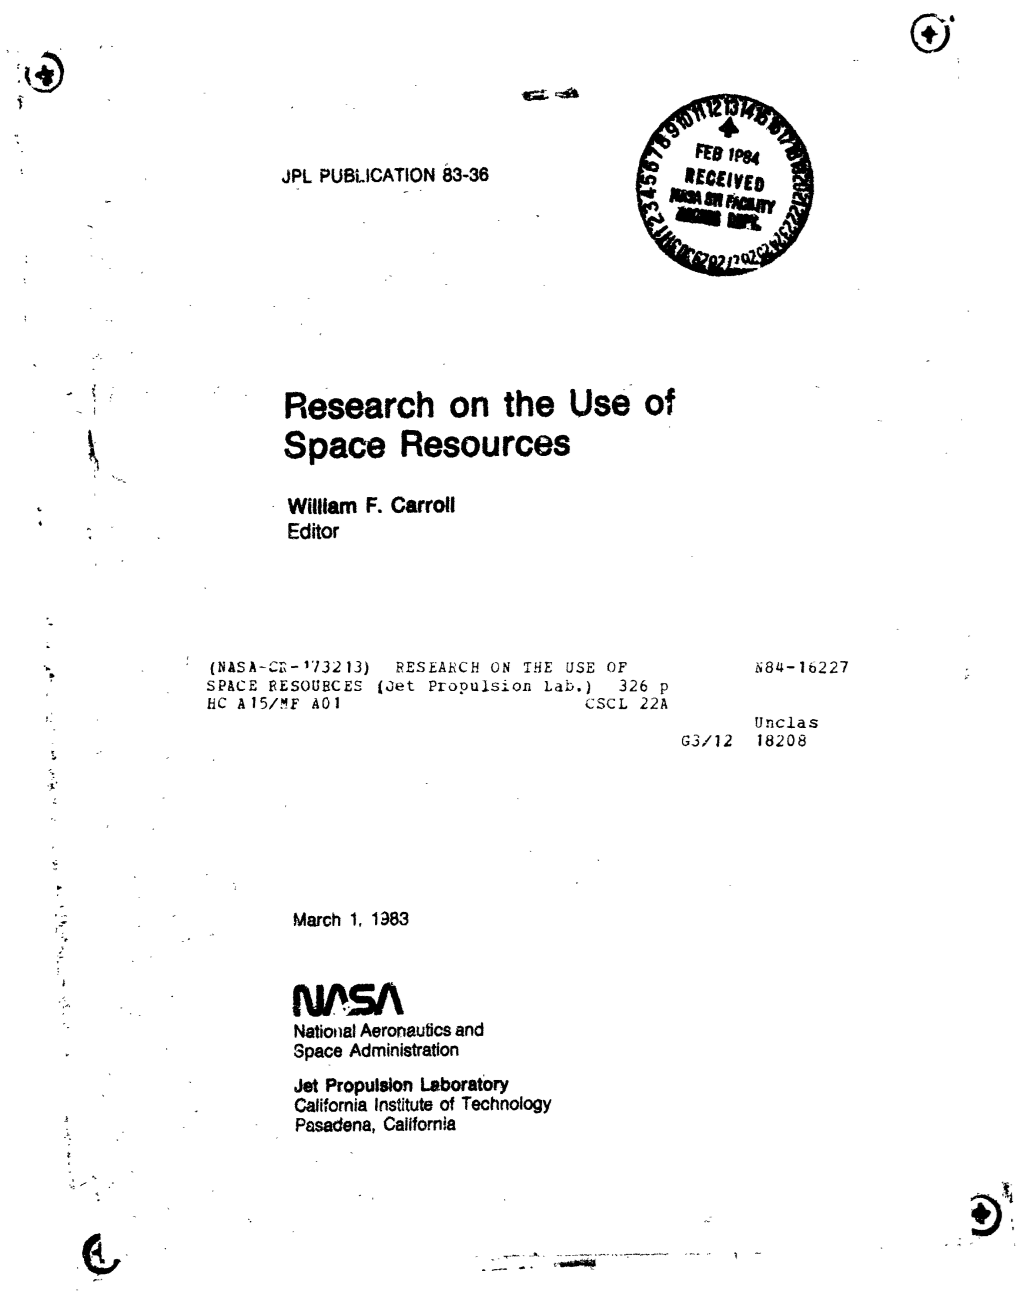 Research on the Use of Space Resources